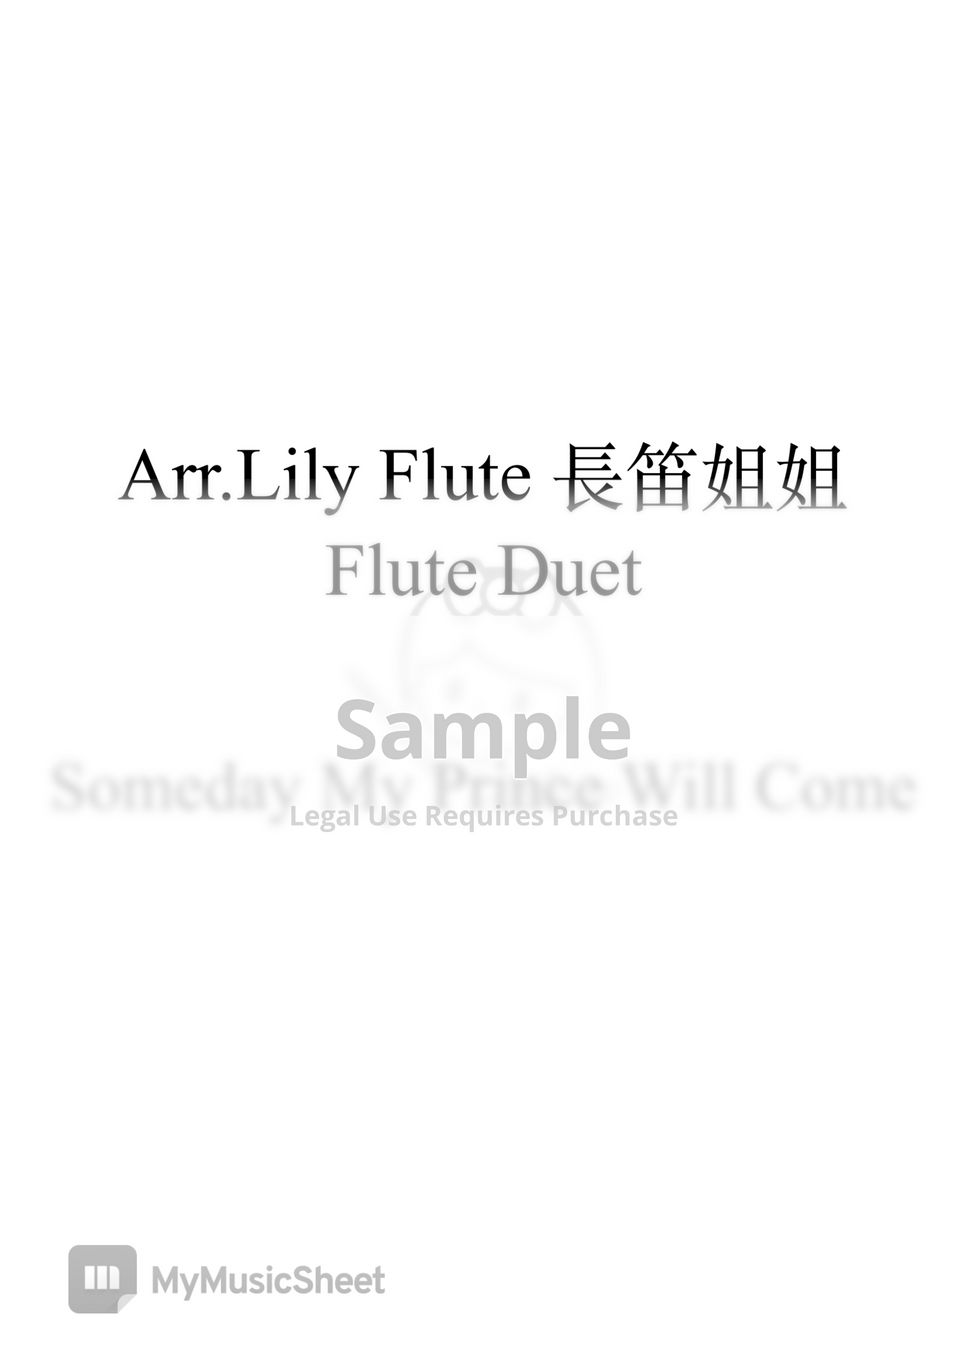 Concertino for two Flutes - Someday my prince will come (Duet) by Lily Flute 長笛姐姐